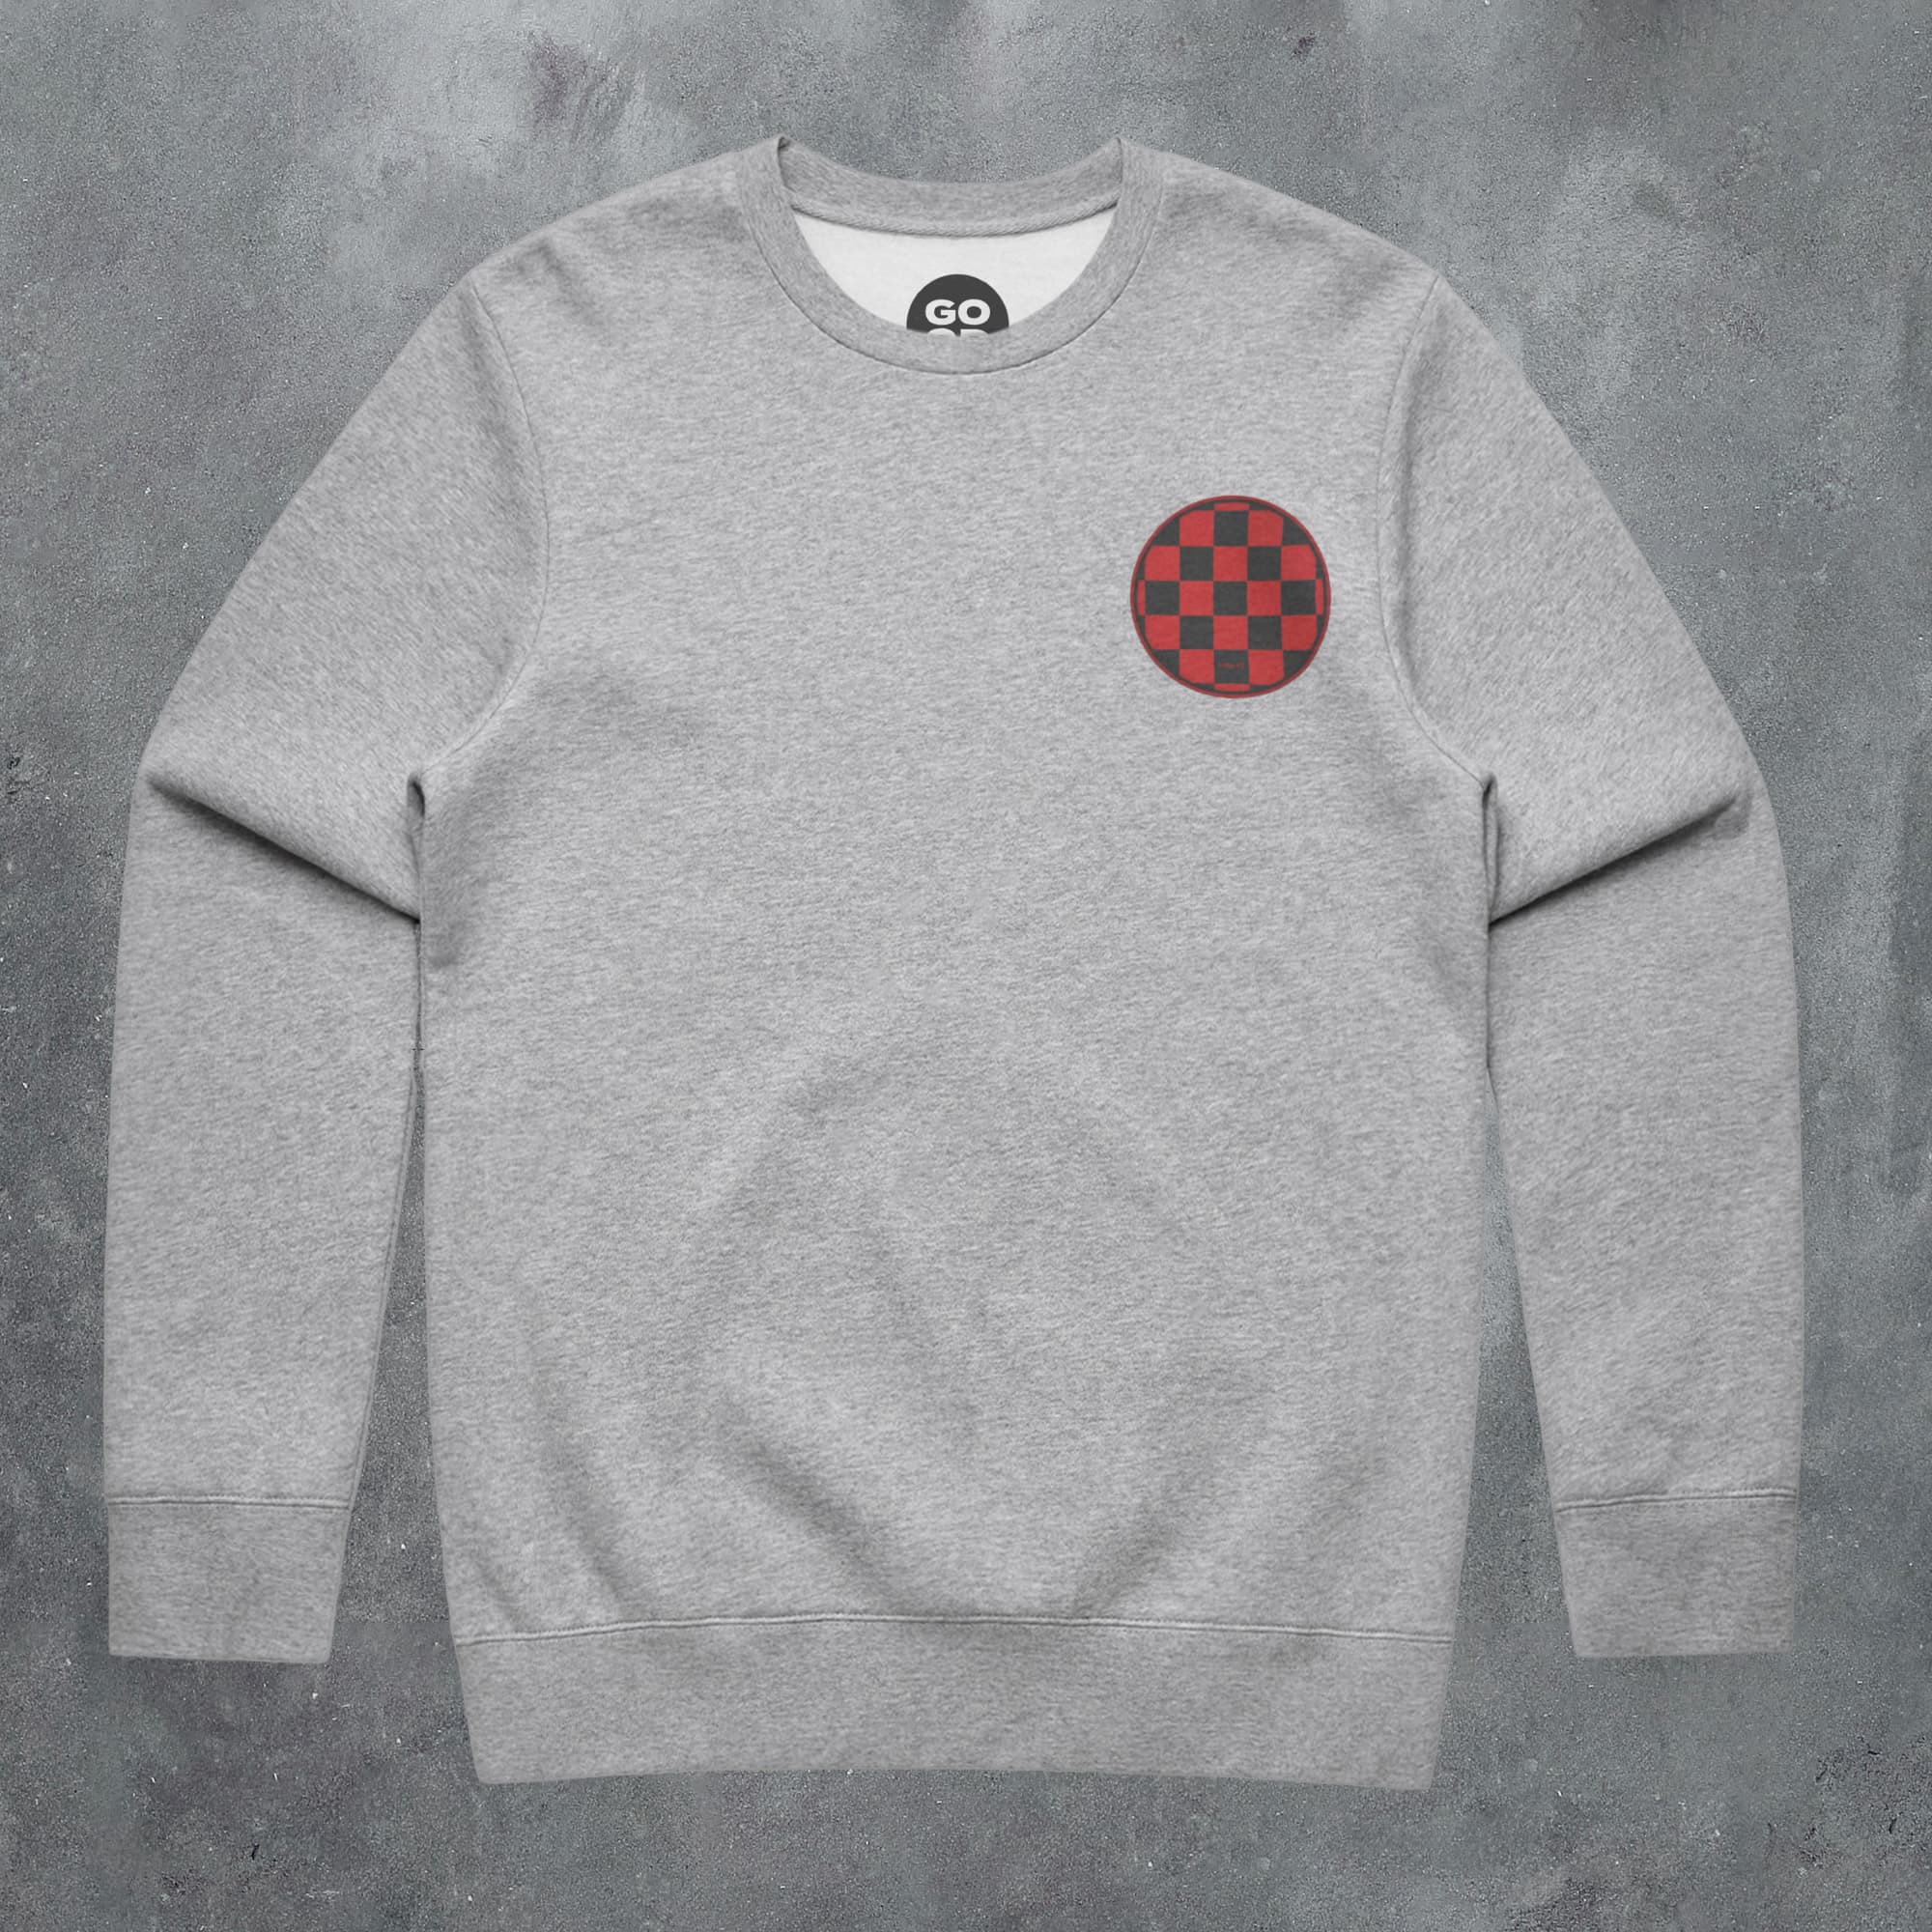 a grey sweatshirt with a red and black checkered patch on the chest